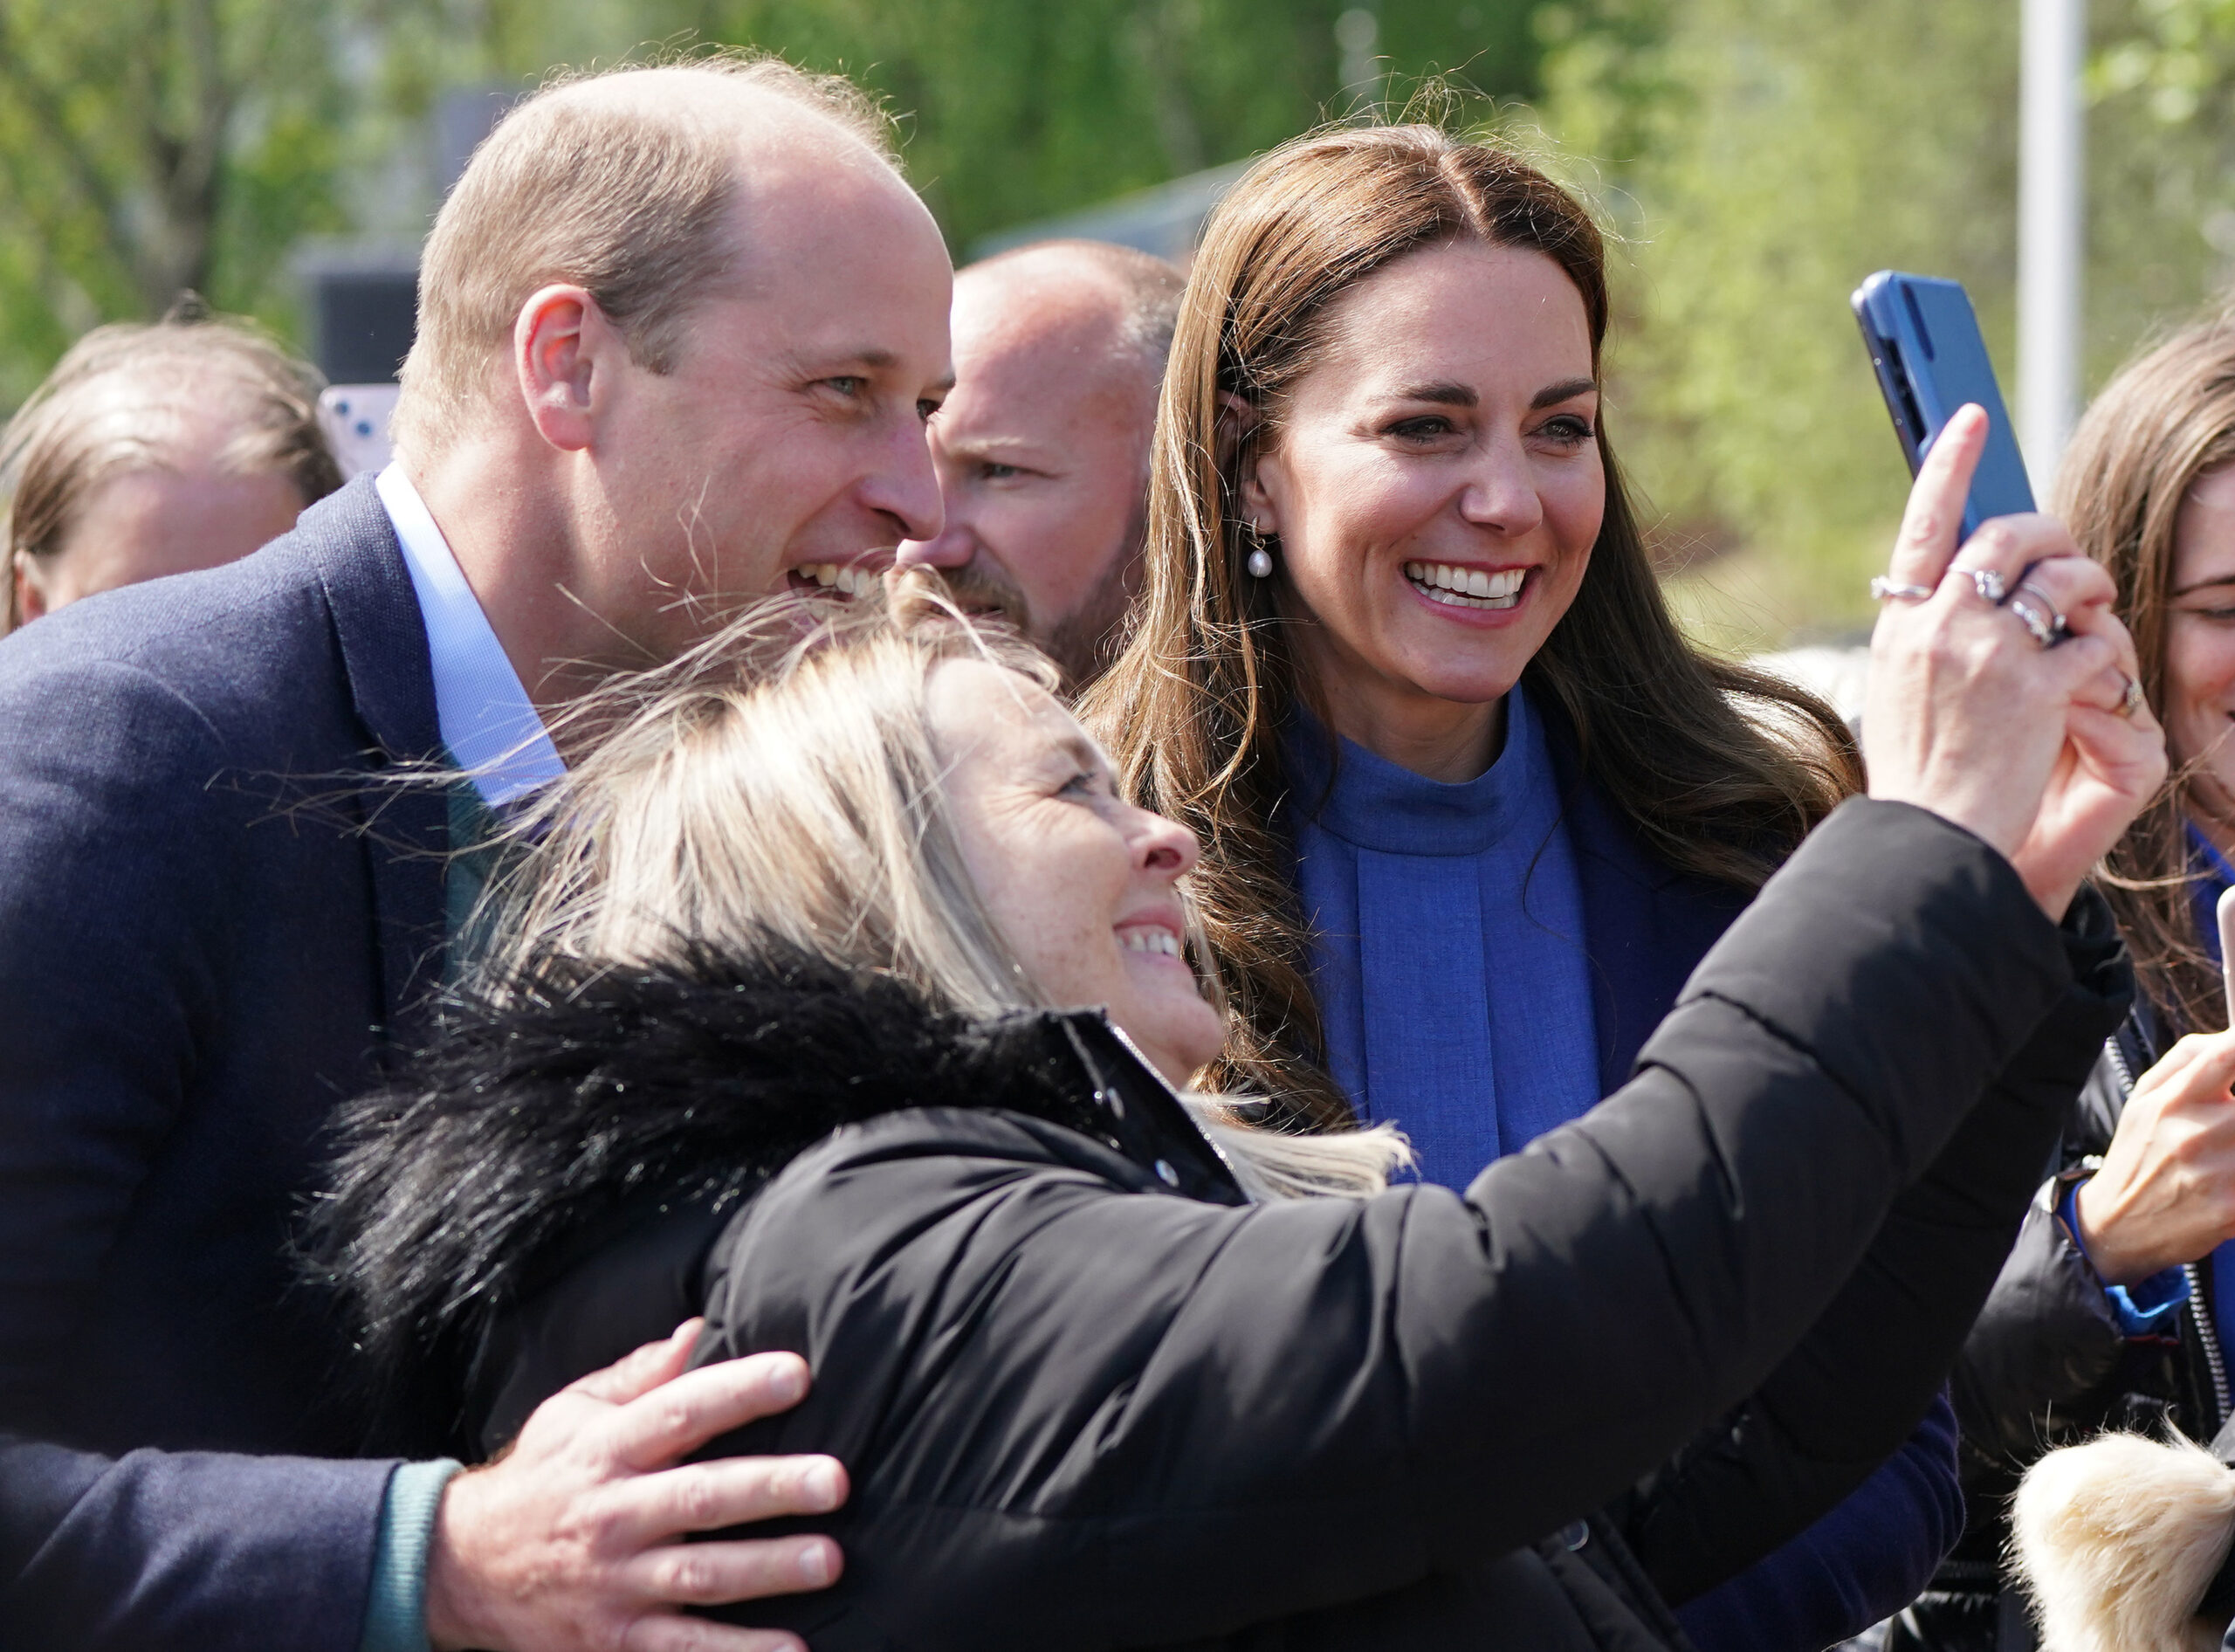 Real+reason+why+Prince+William+isn%26%238217%3Bt+visiting+Kate+Middleton+in+hospital